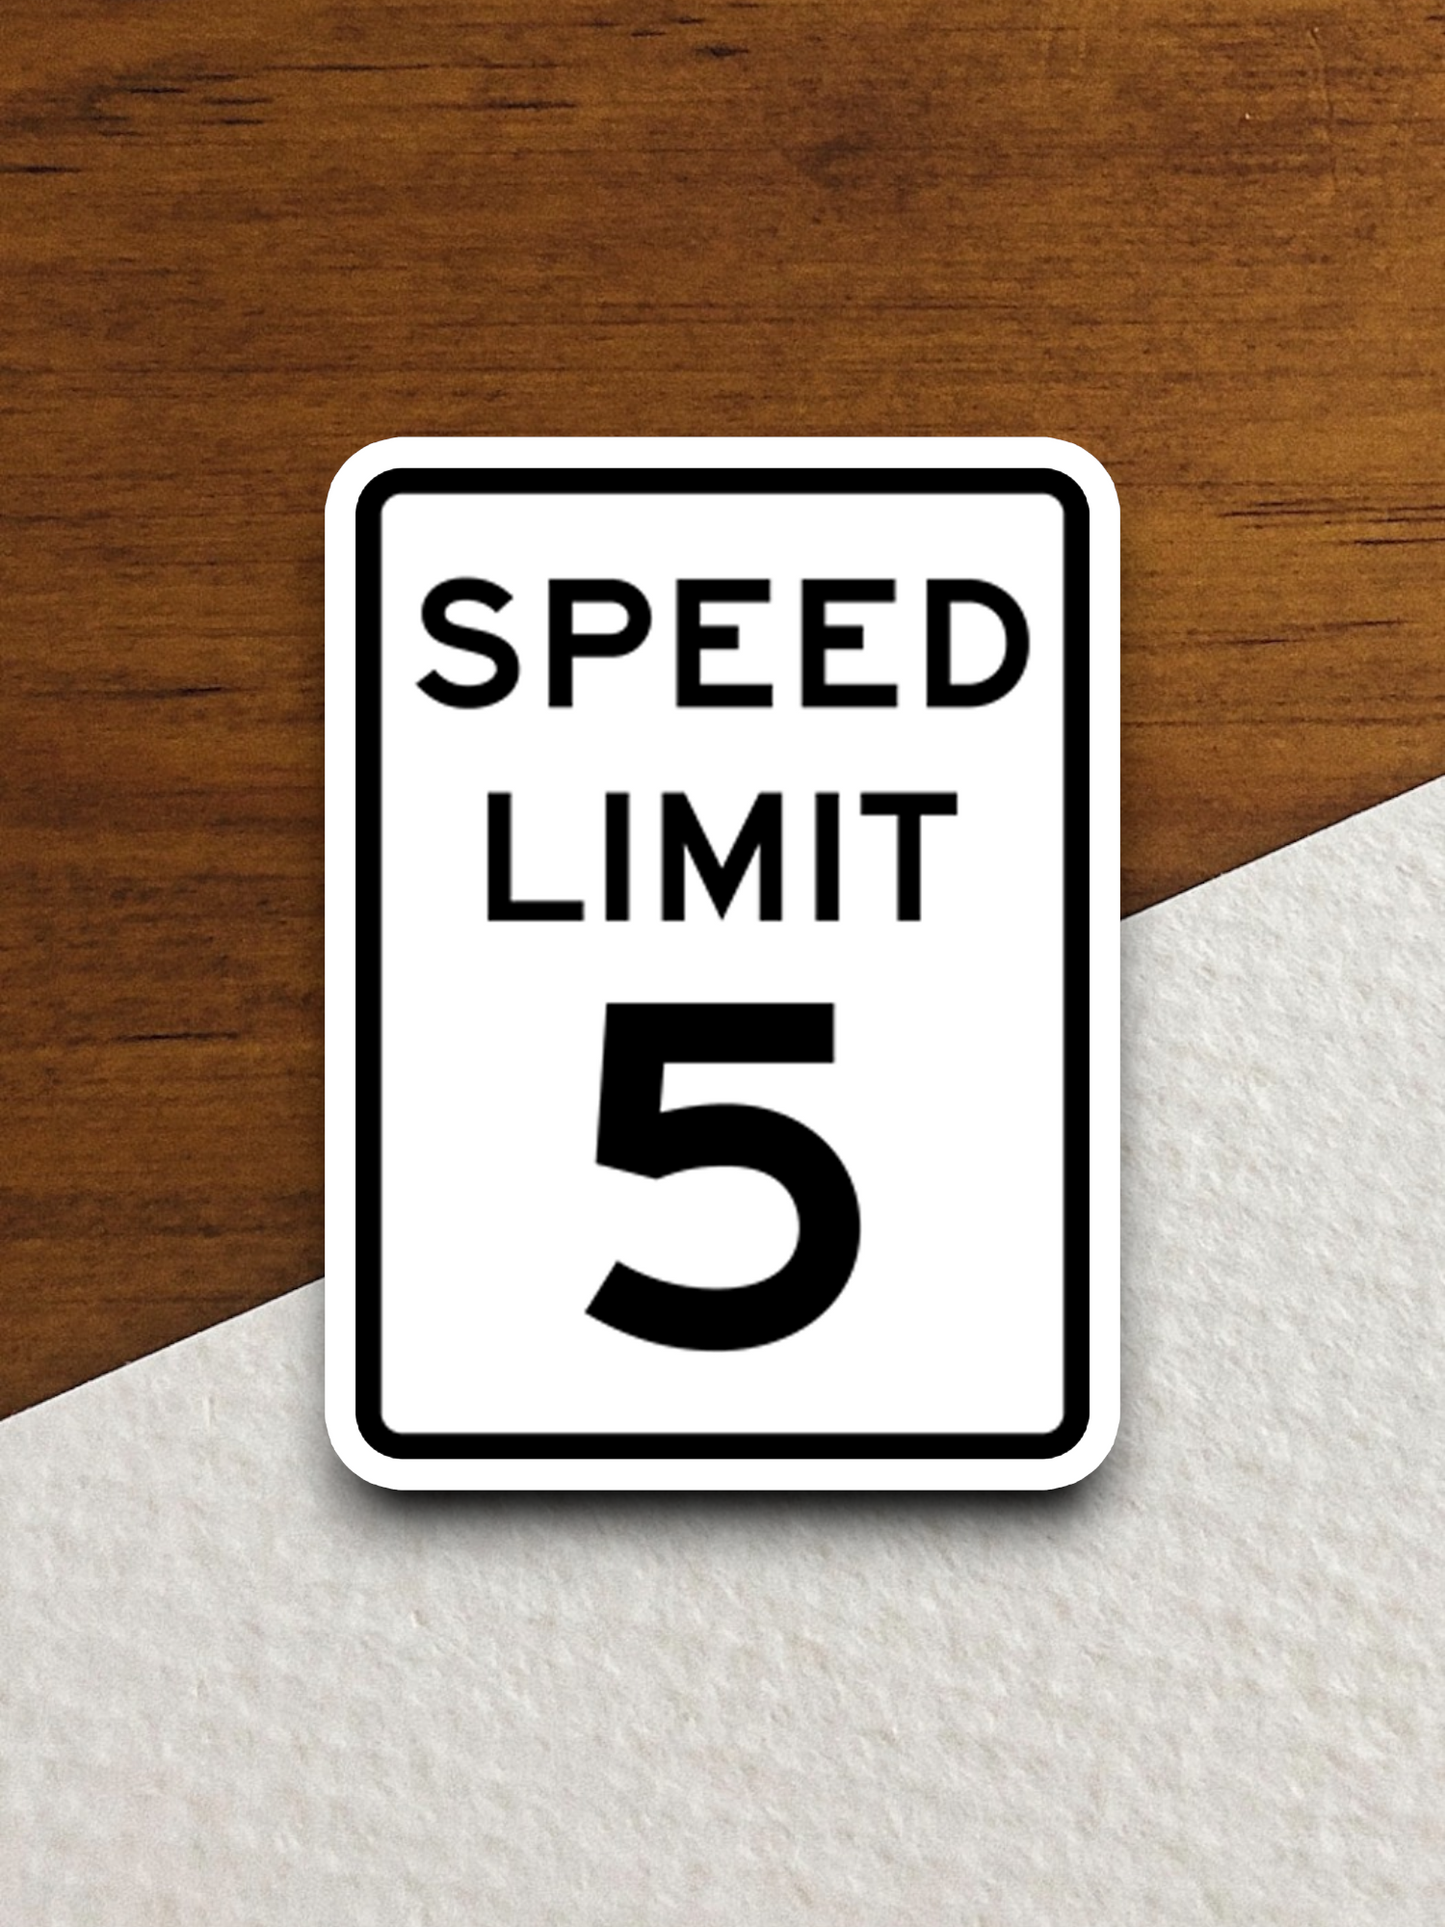 5 Miles Per Hour Speed Limit Road Sign Sticker